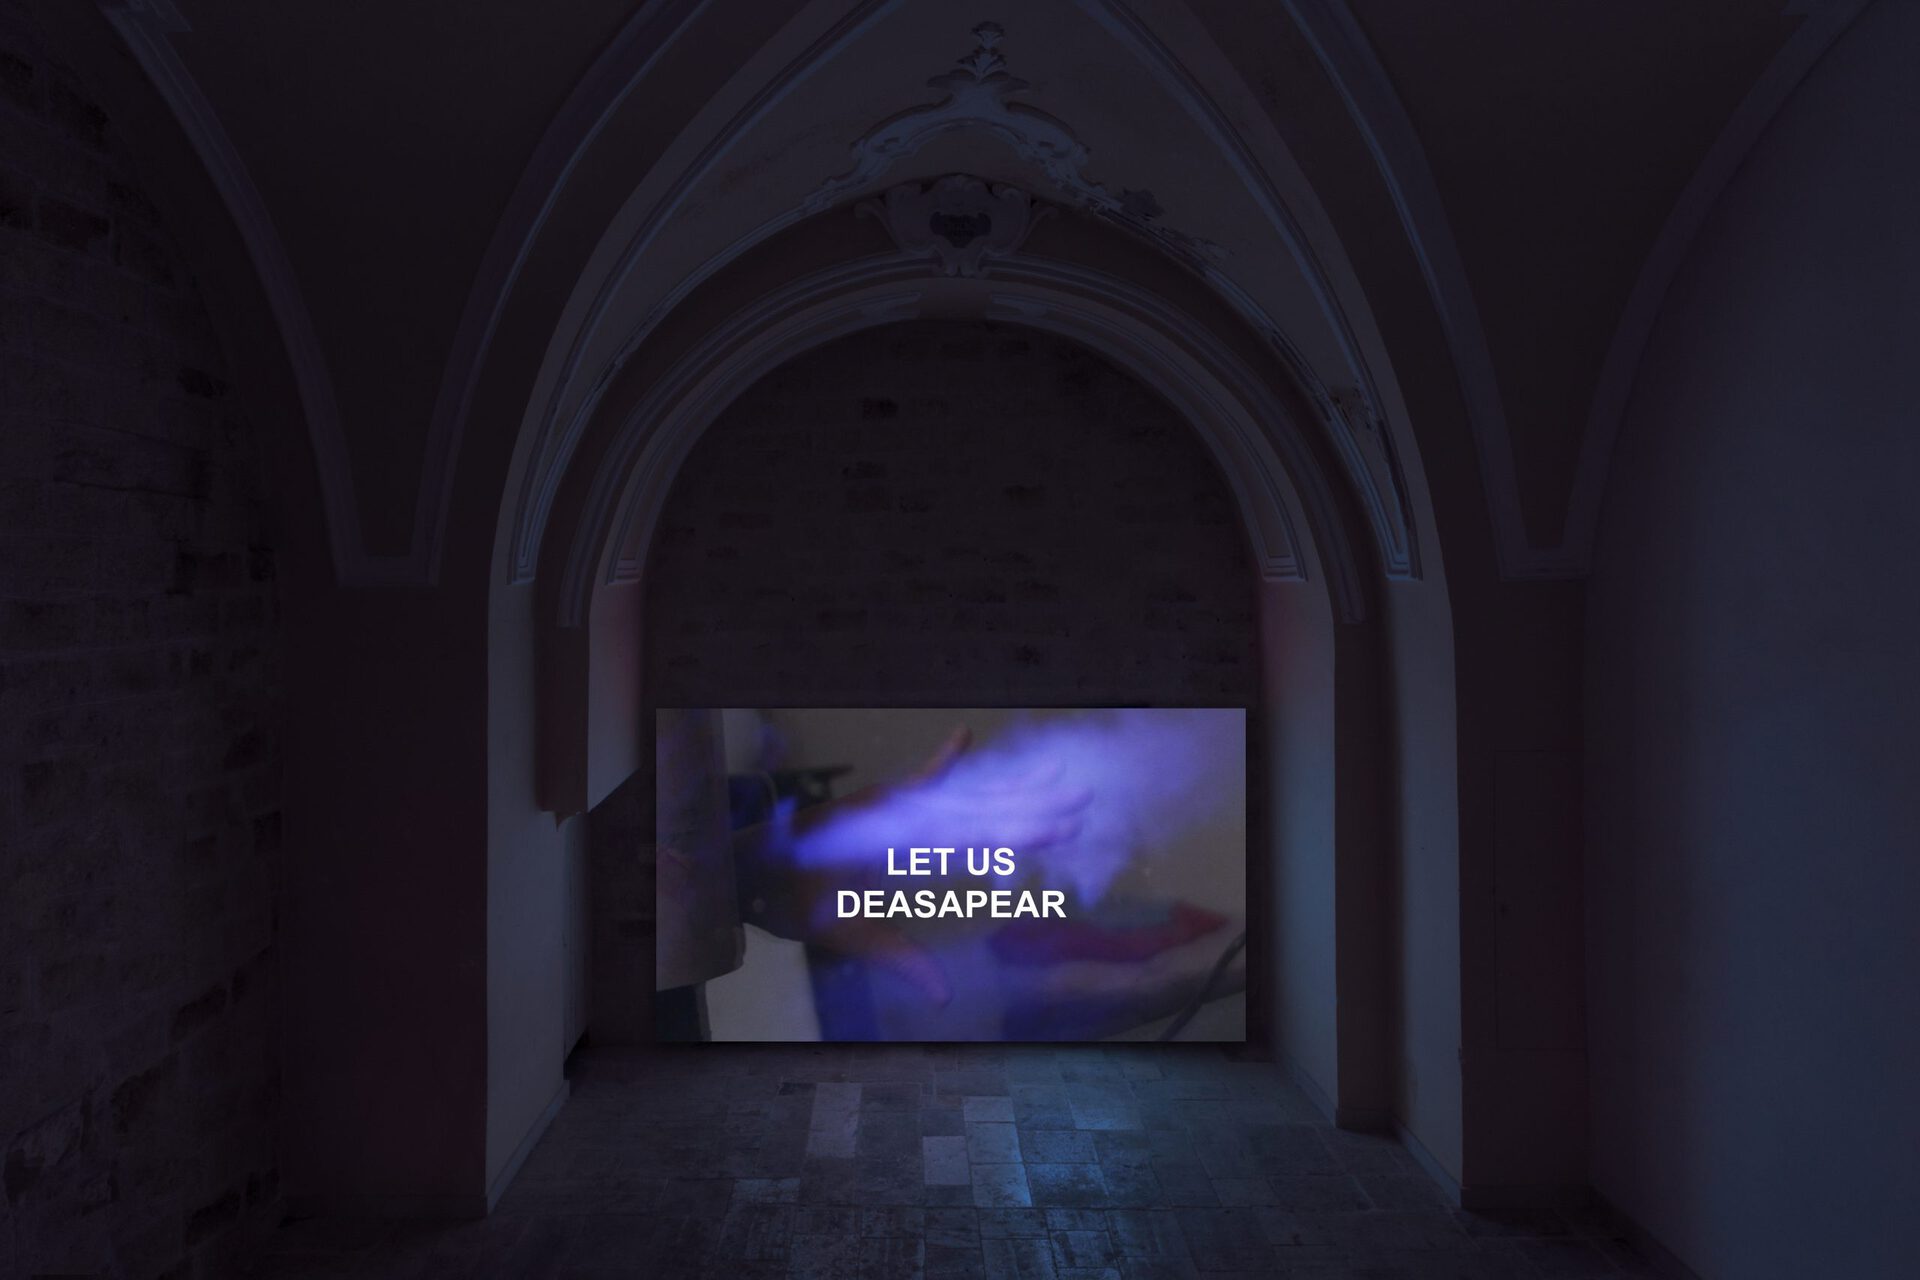 Laure Prouvost, We Know We Are Just Pixels 2015 - 4 minutes, 44 seconds, Colour, Stereo, 16:9 - HD video